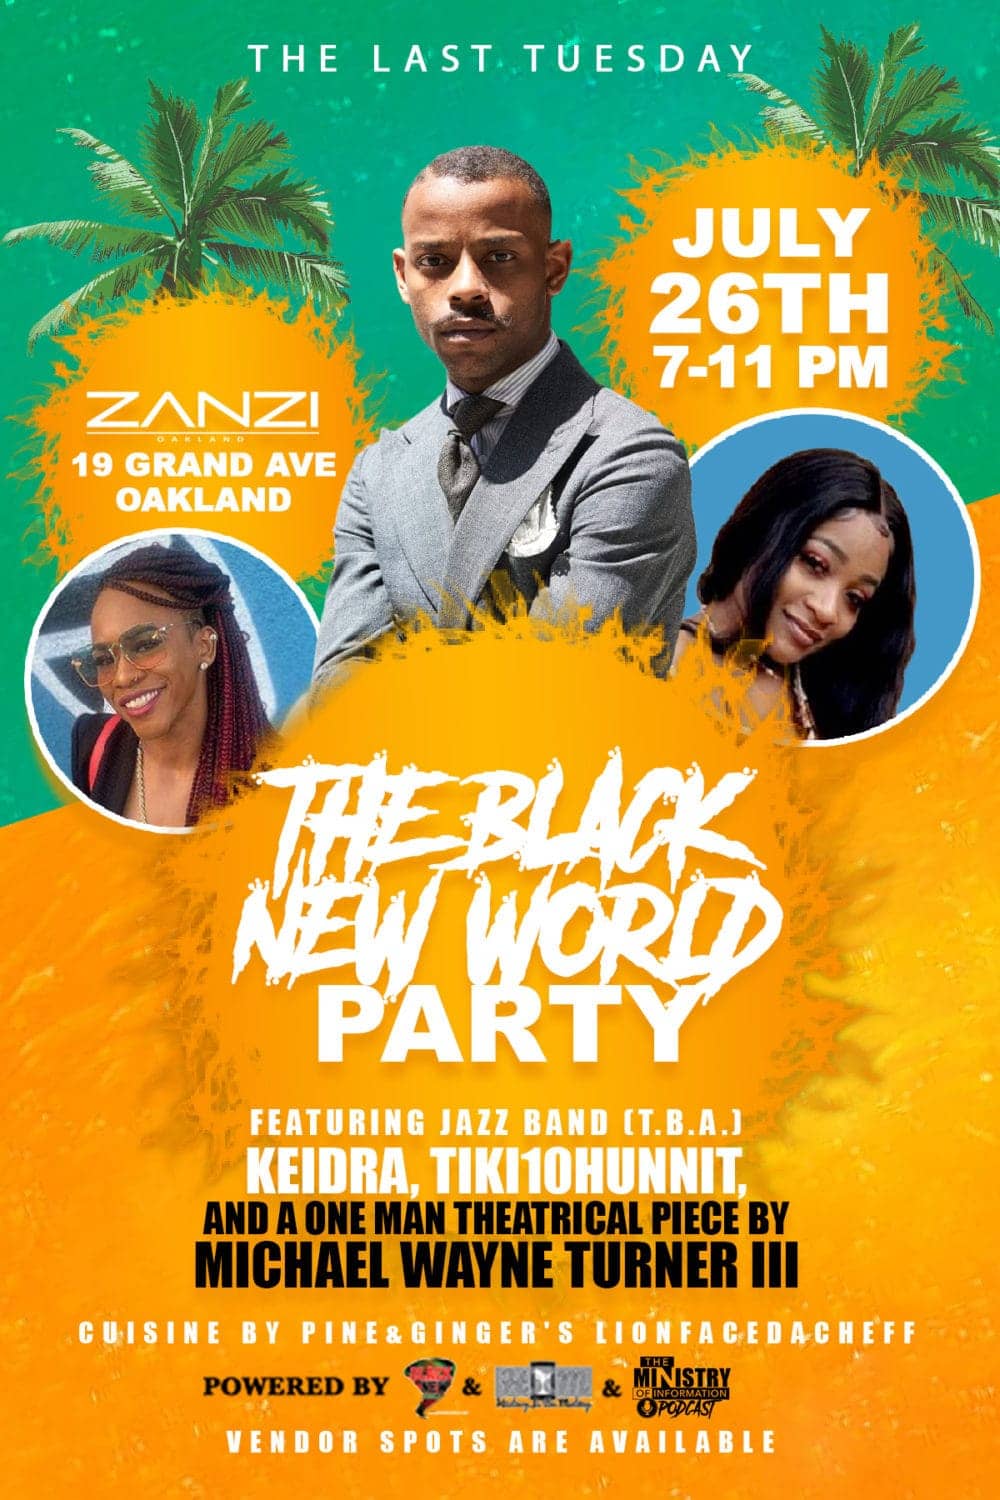 The-Black-New-World-Party-poster-072622, Thespian Michael Wayne Turner III is turning heads on Oakland stages, Culture Currents Local News & Views News & Views 